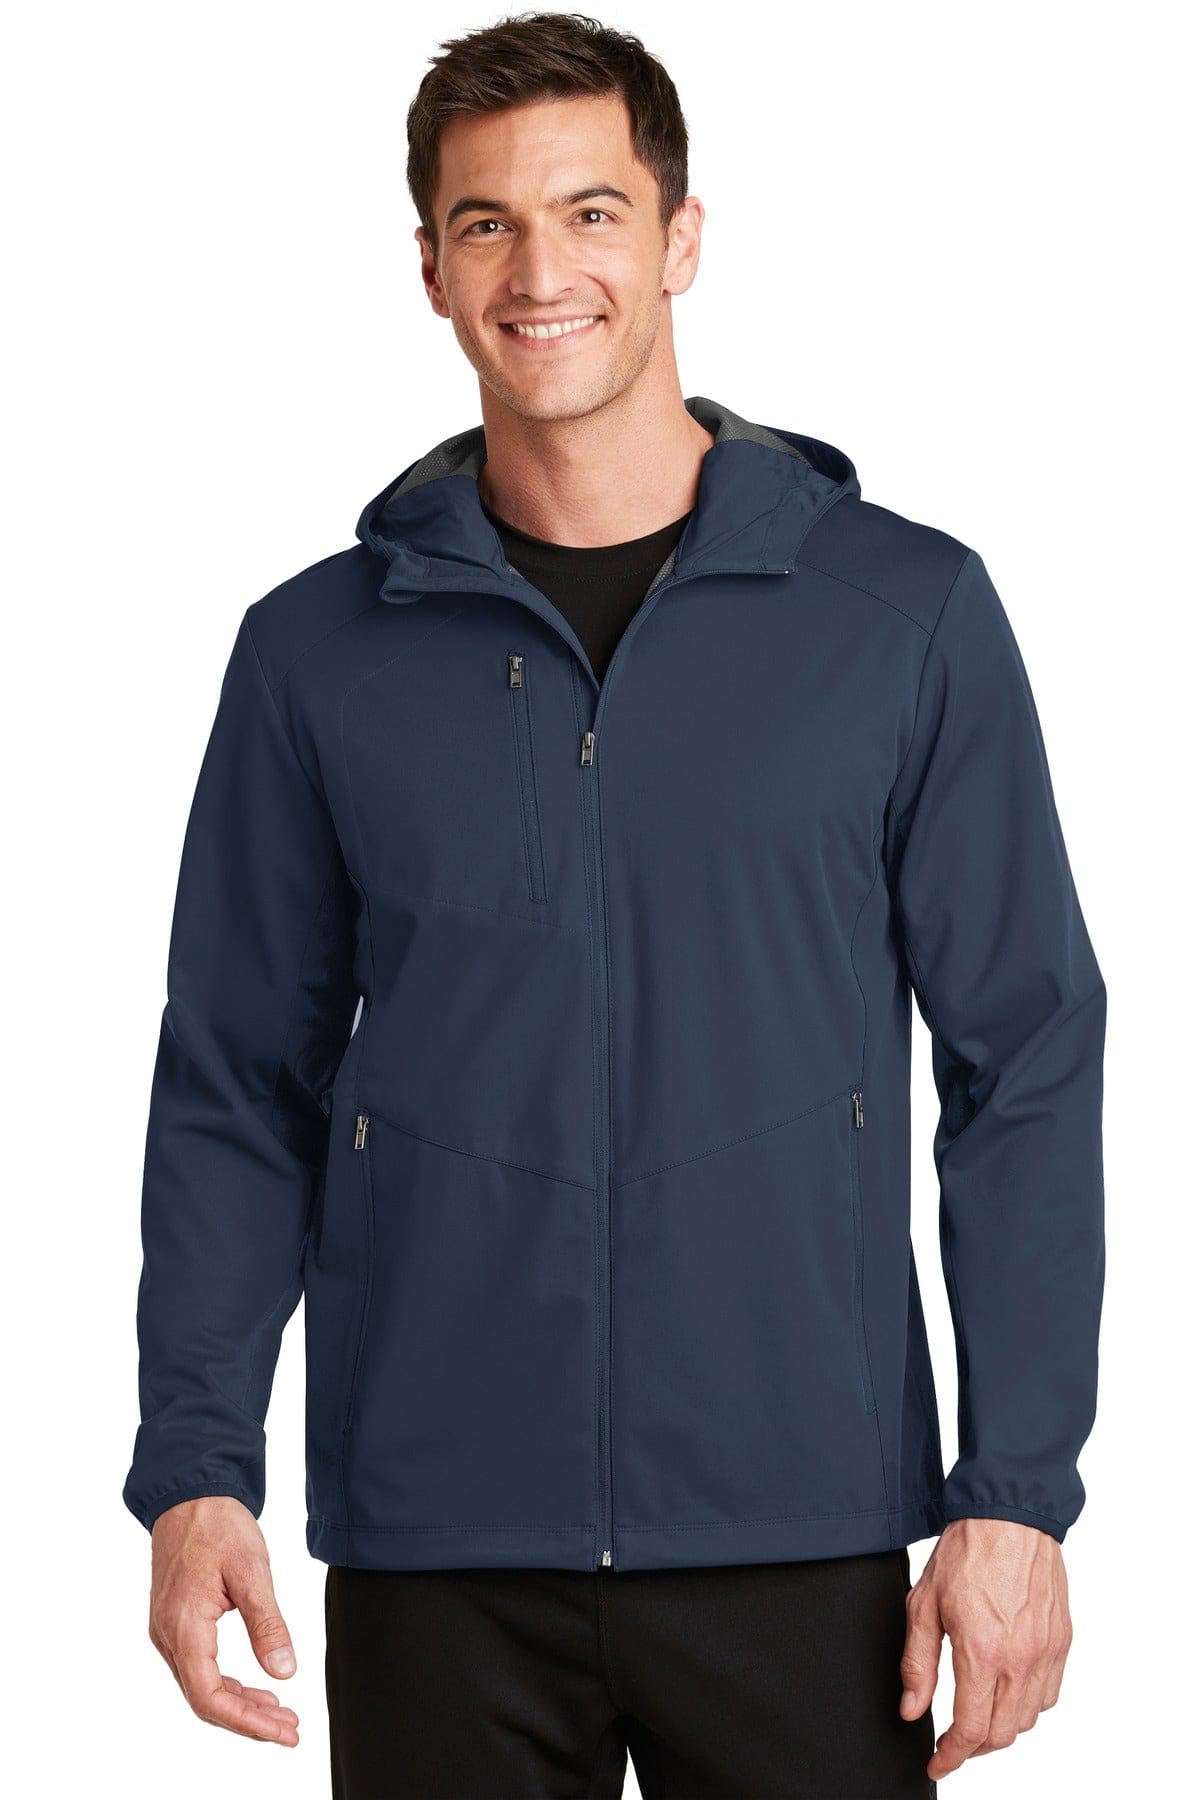 Port Authority Active Hooded Soft Shell Jacket. J719 - Activewear Outerwear